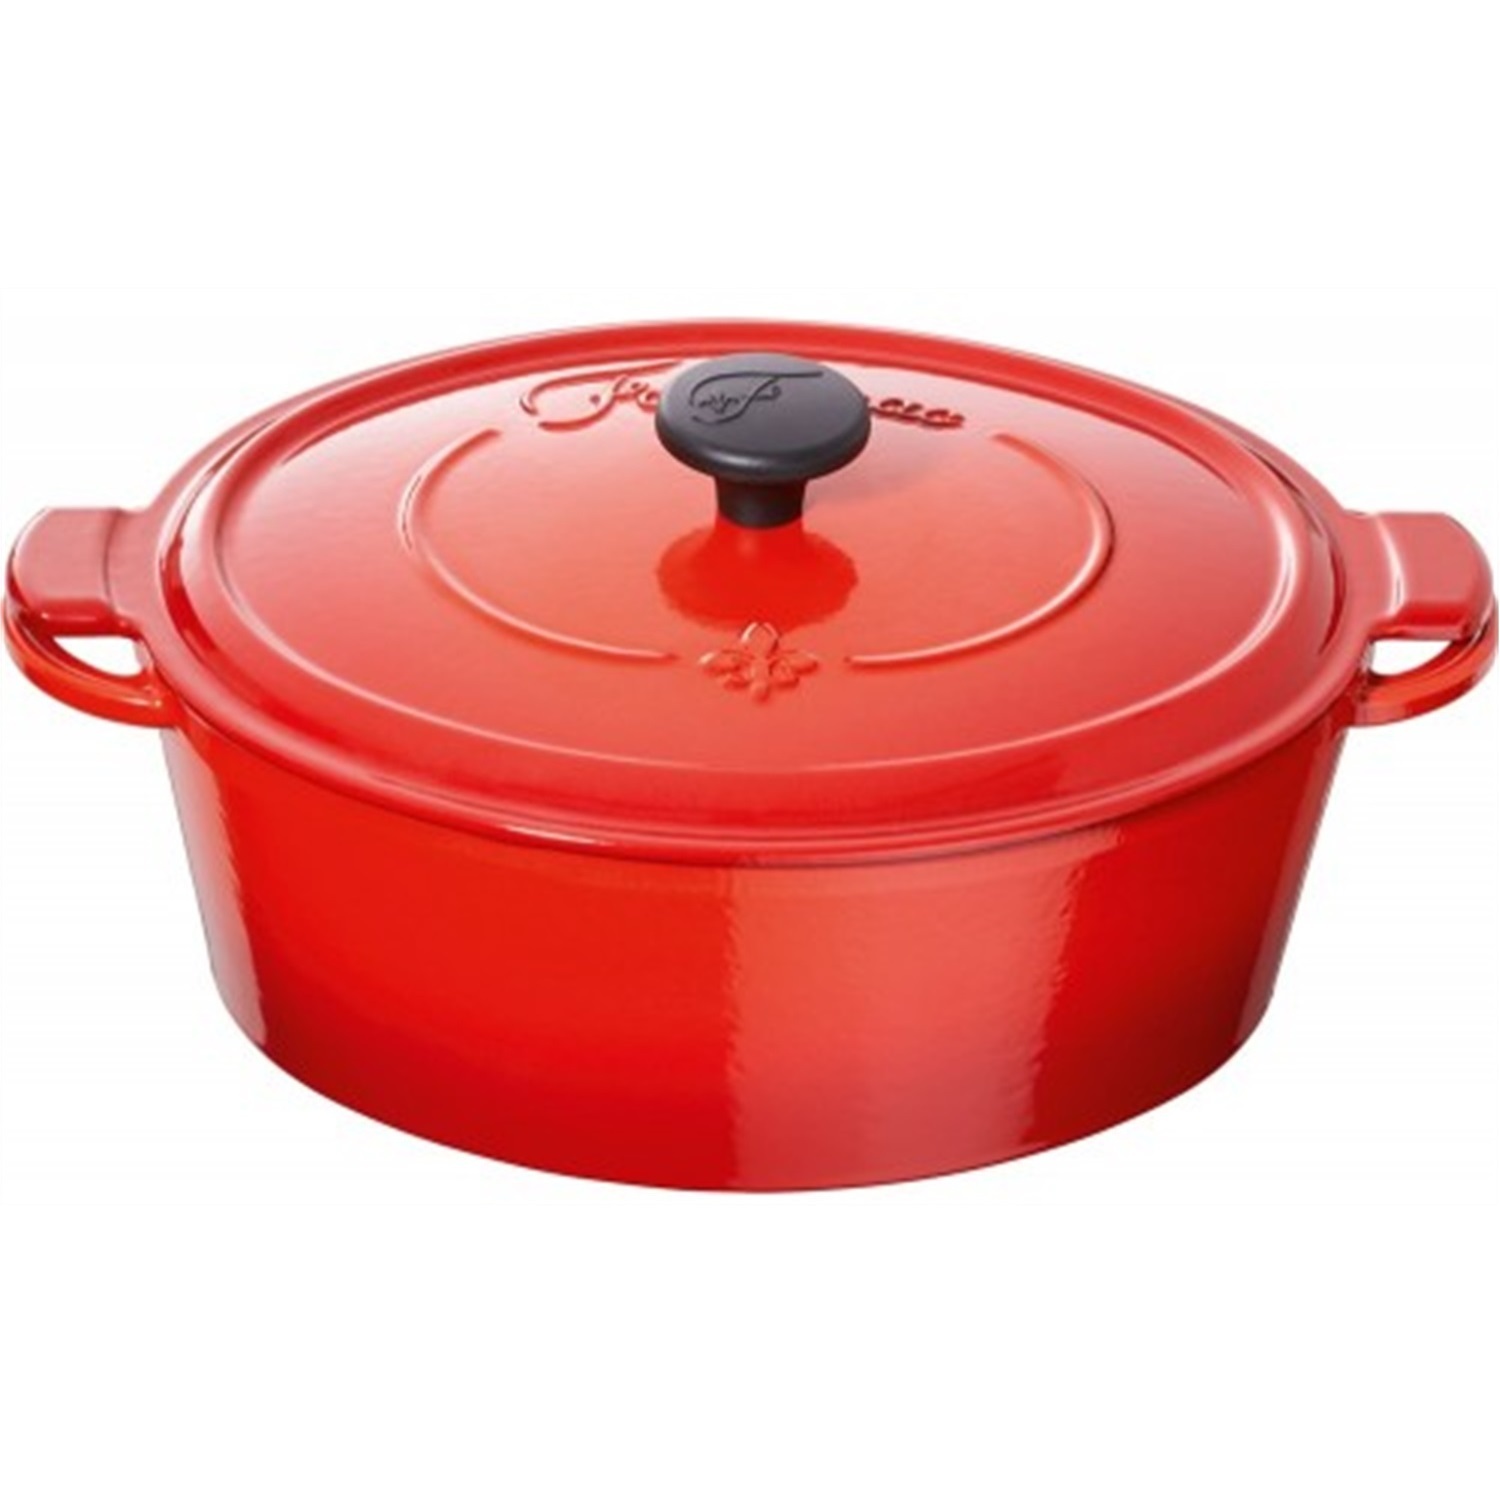 Fontignac Mains libres ovale cocotte/braadpan 33 cm - rood